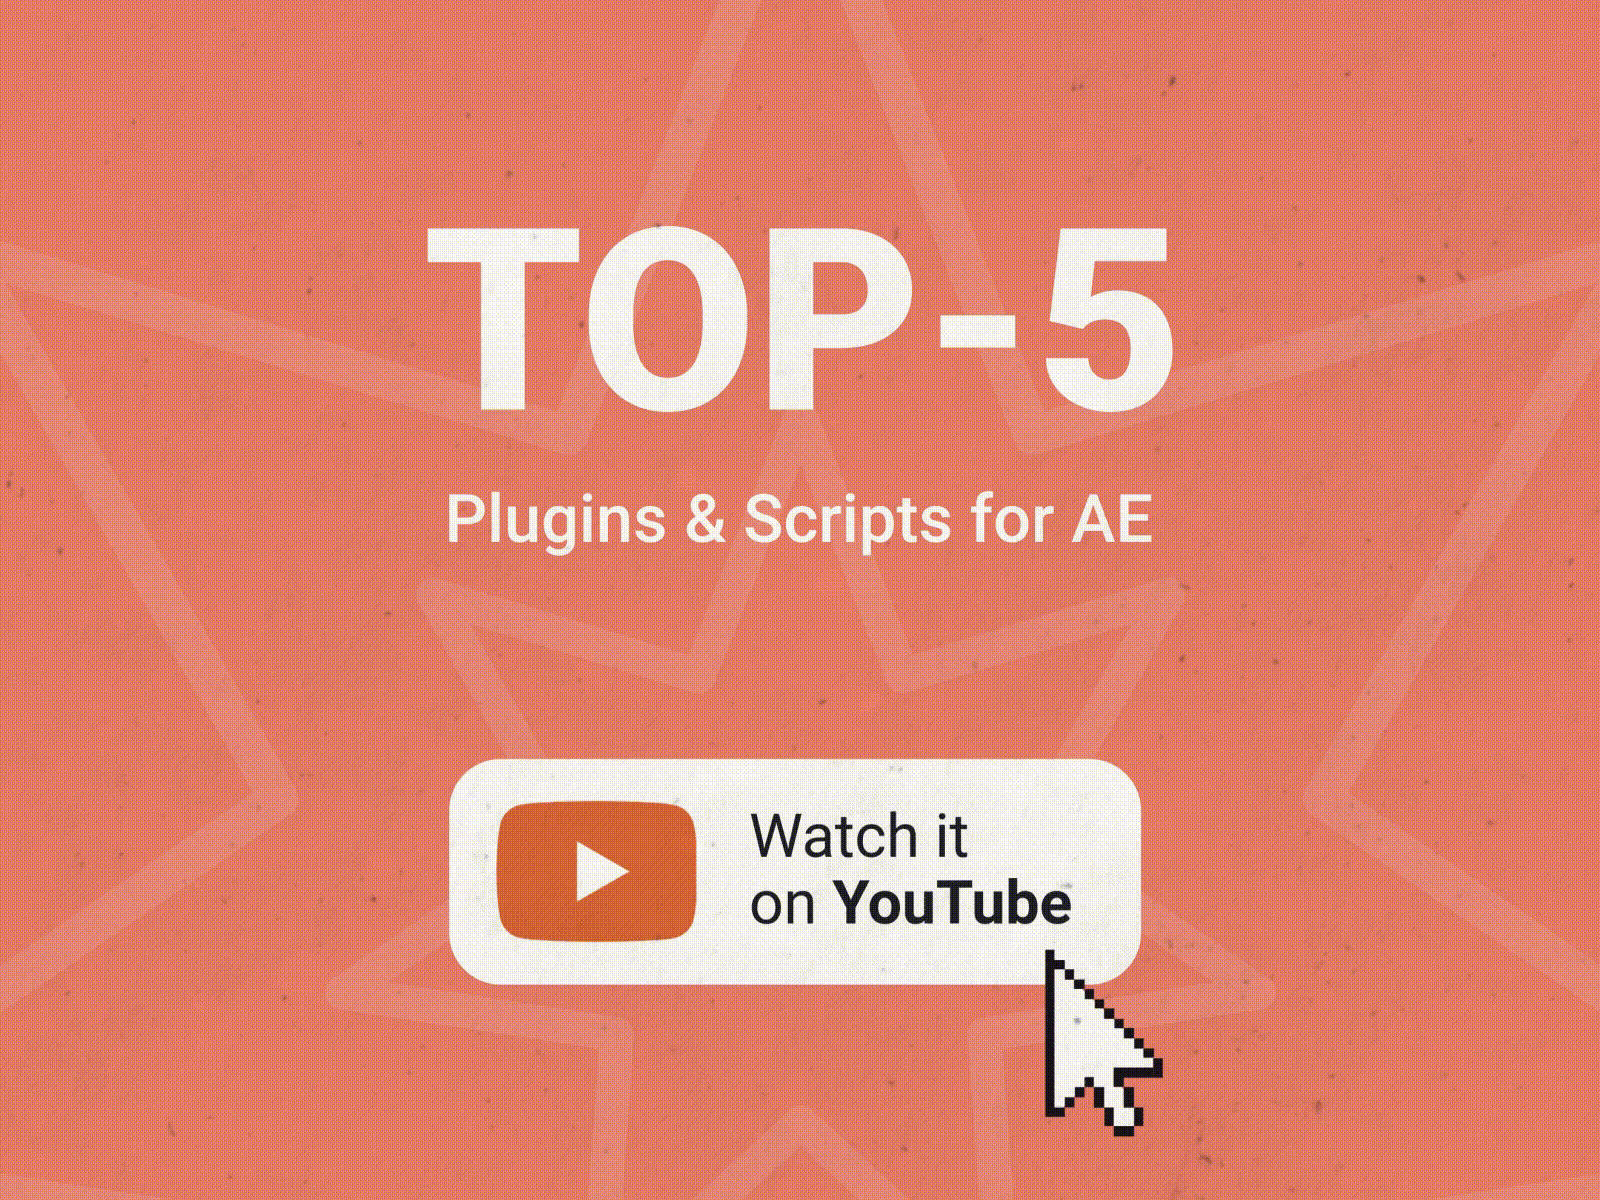 Top-5 plugins for After Effects adobe after effects animation design free inspiration mograph motion motiongraphics overview tutorial